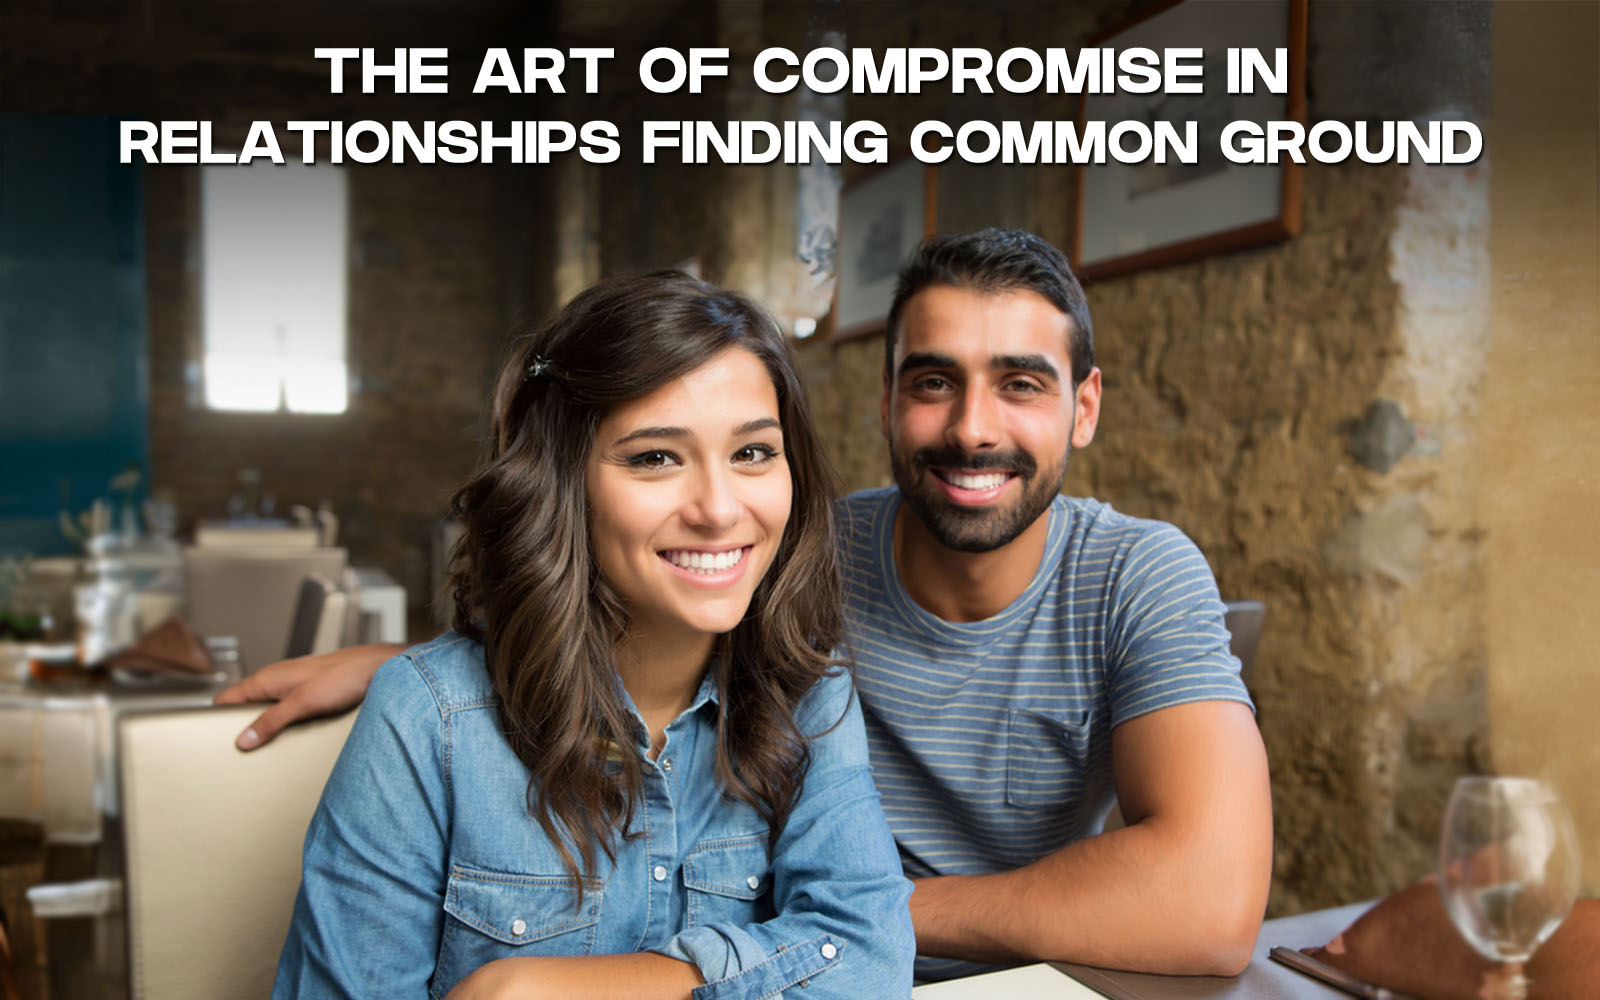 The Art of Compromise in Relationships: Finding Common Ground